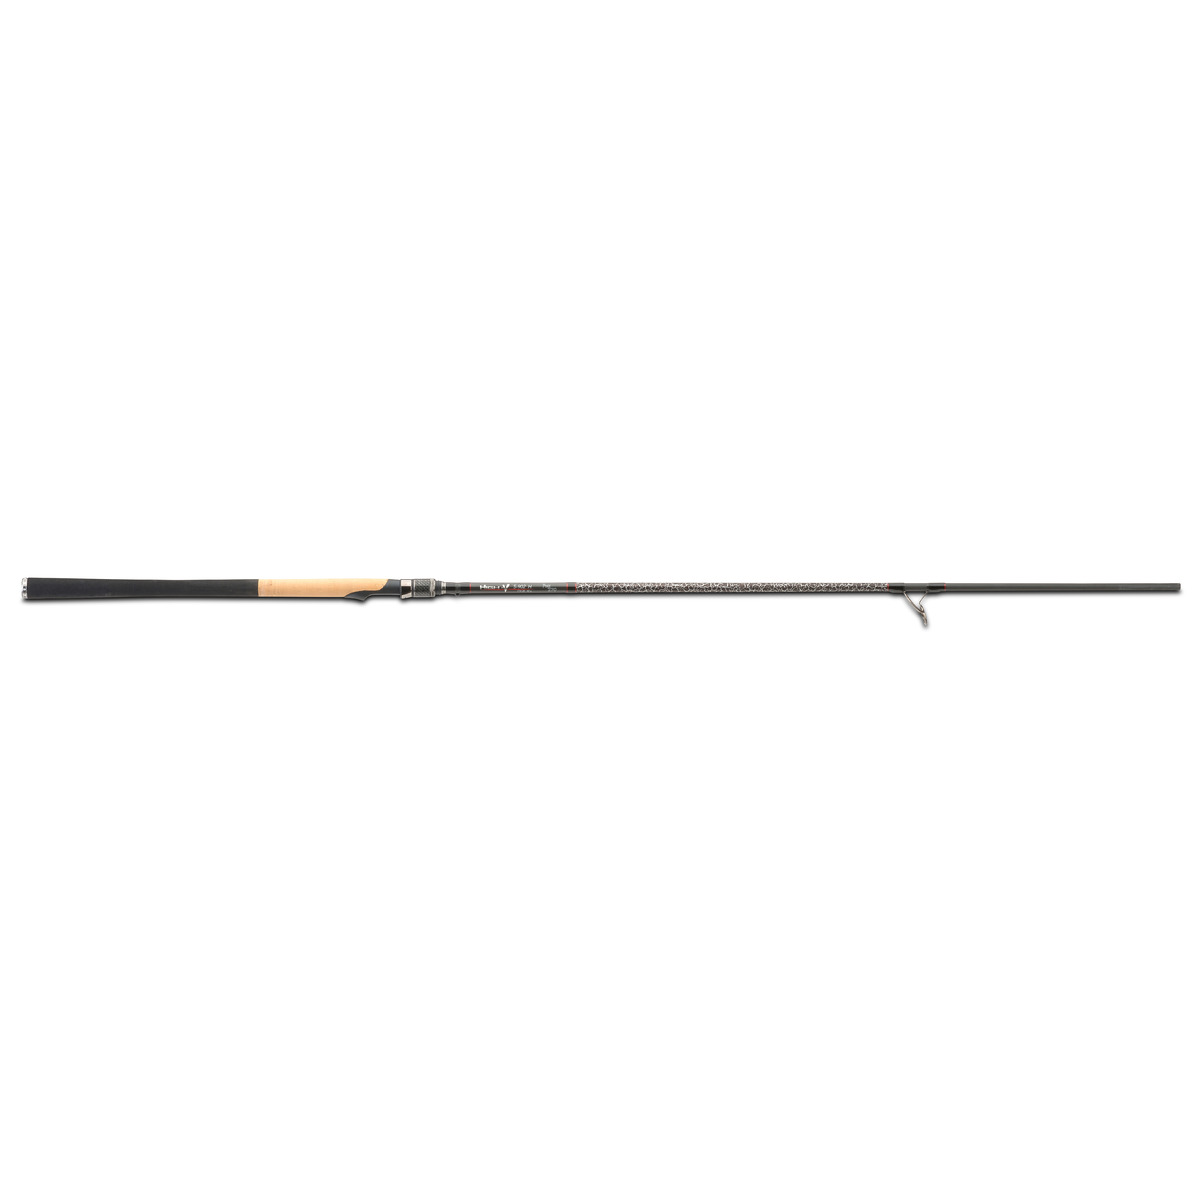 Iron Claw High-v Pike - S-902H Pike 2,70m 28-90 g